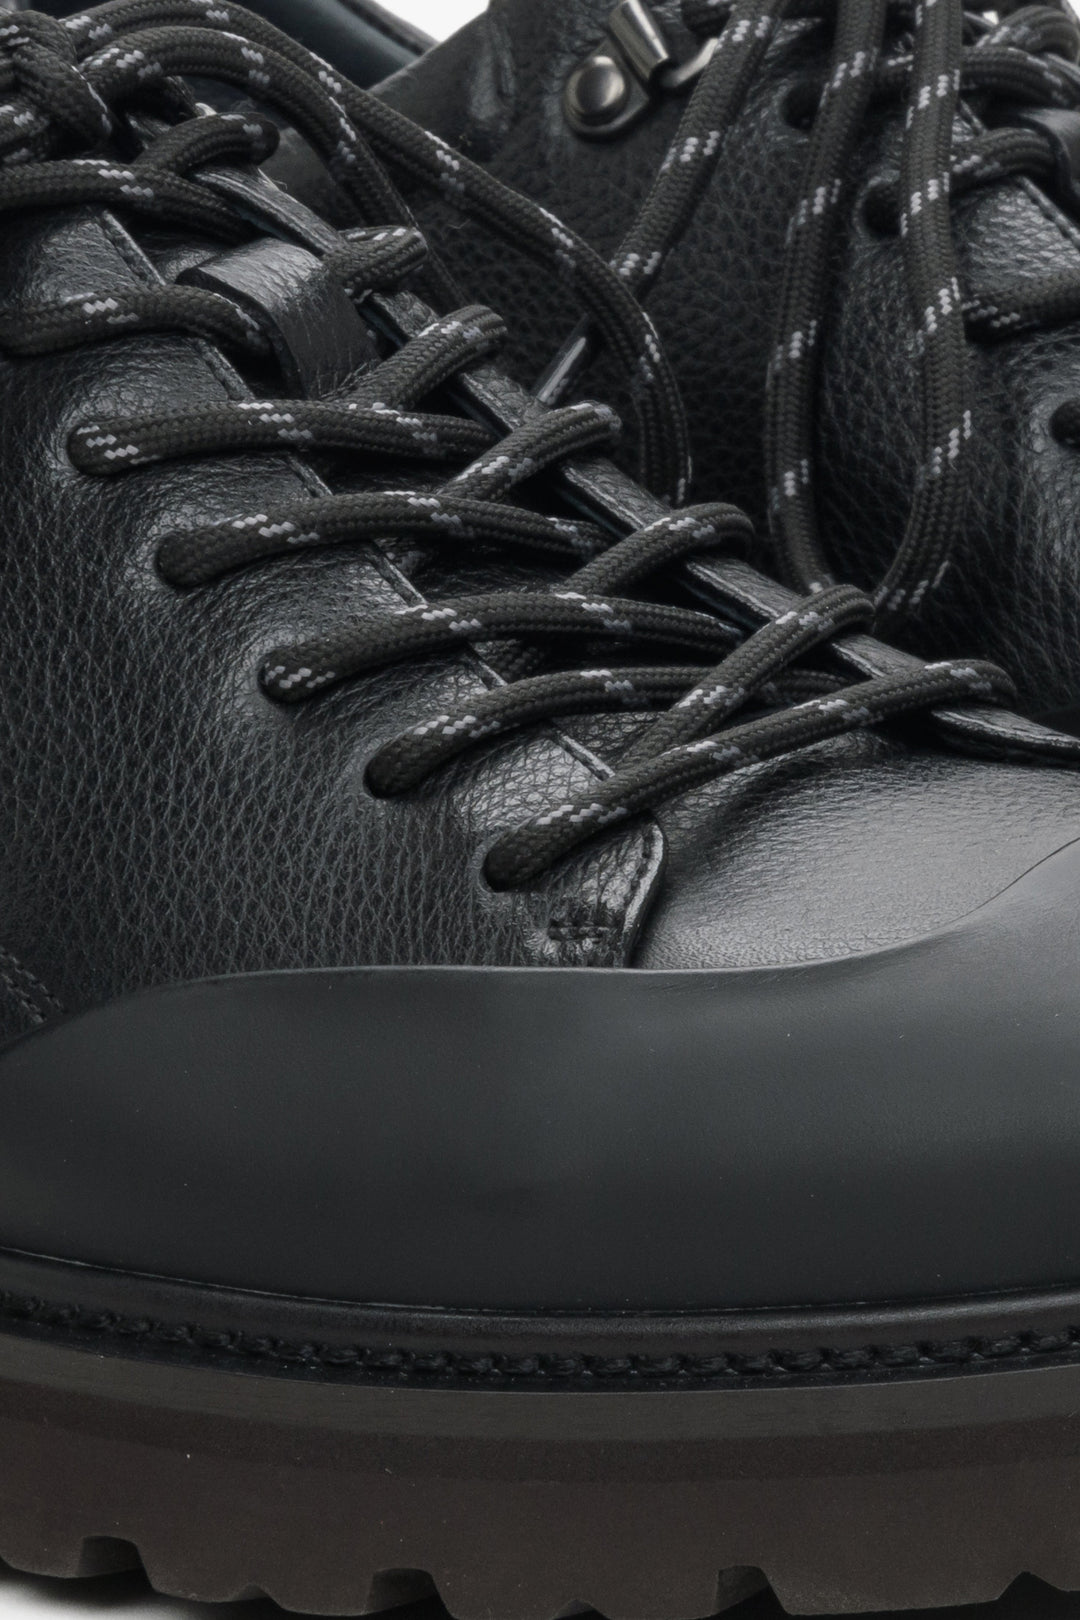 Men's black leather loafers - close-up on the details.